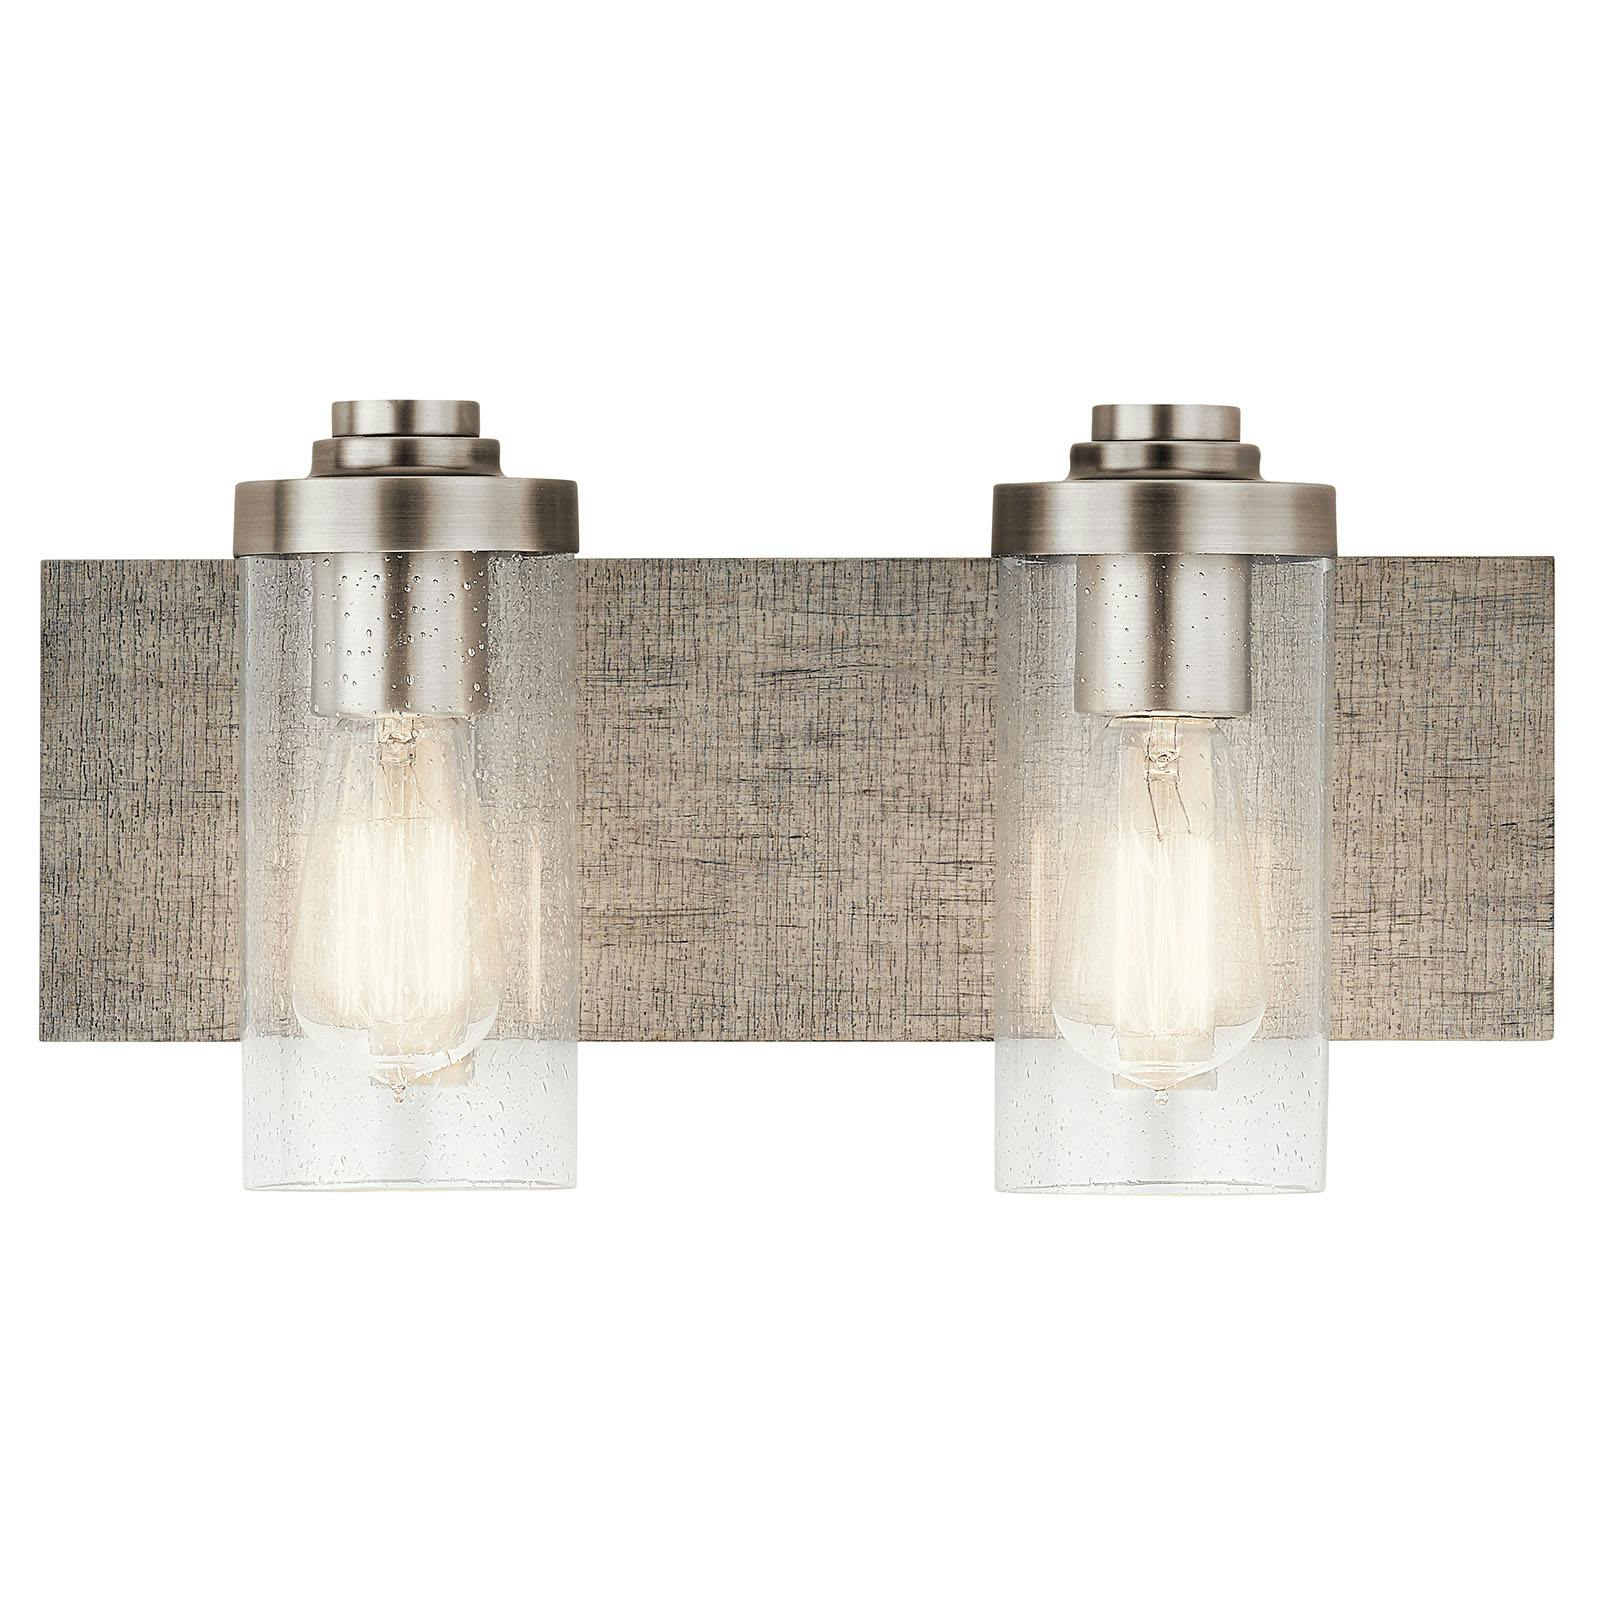 The Dalwood 2 Light Vanity Light Pewter facing down on a white background